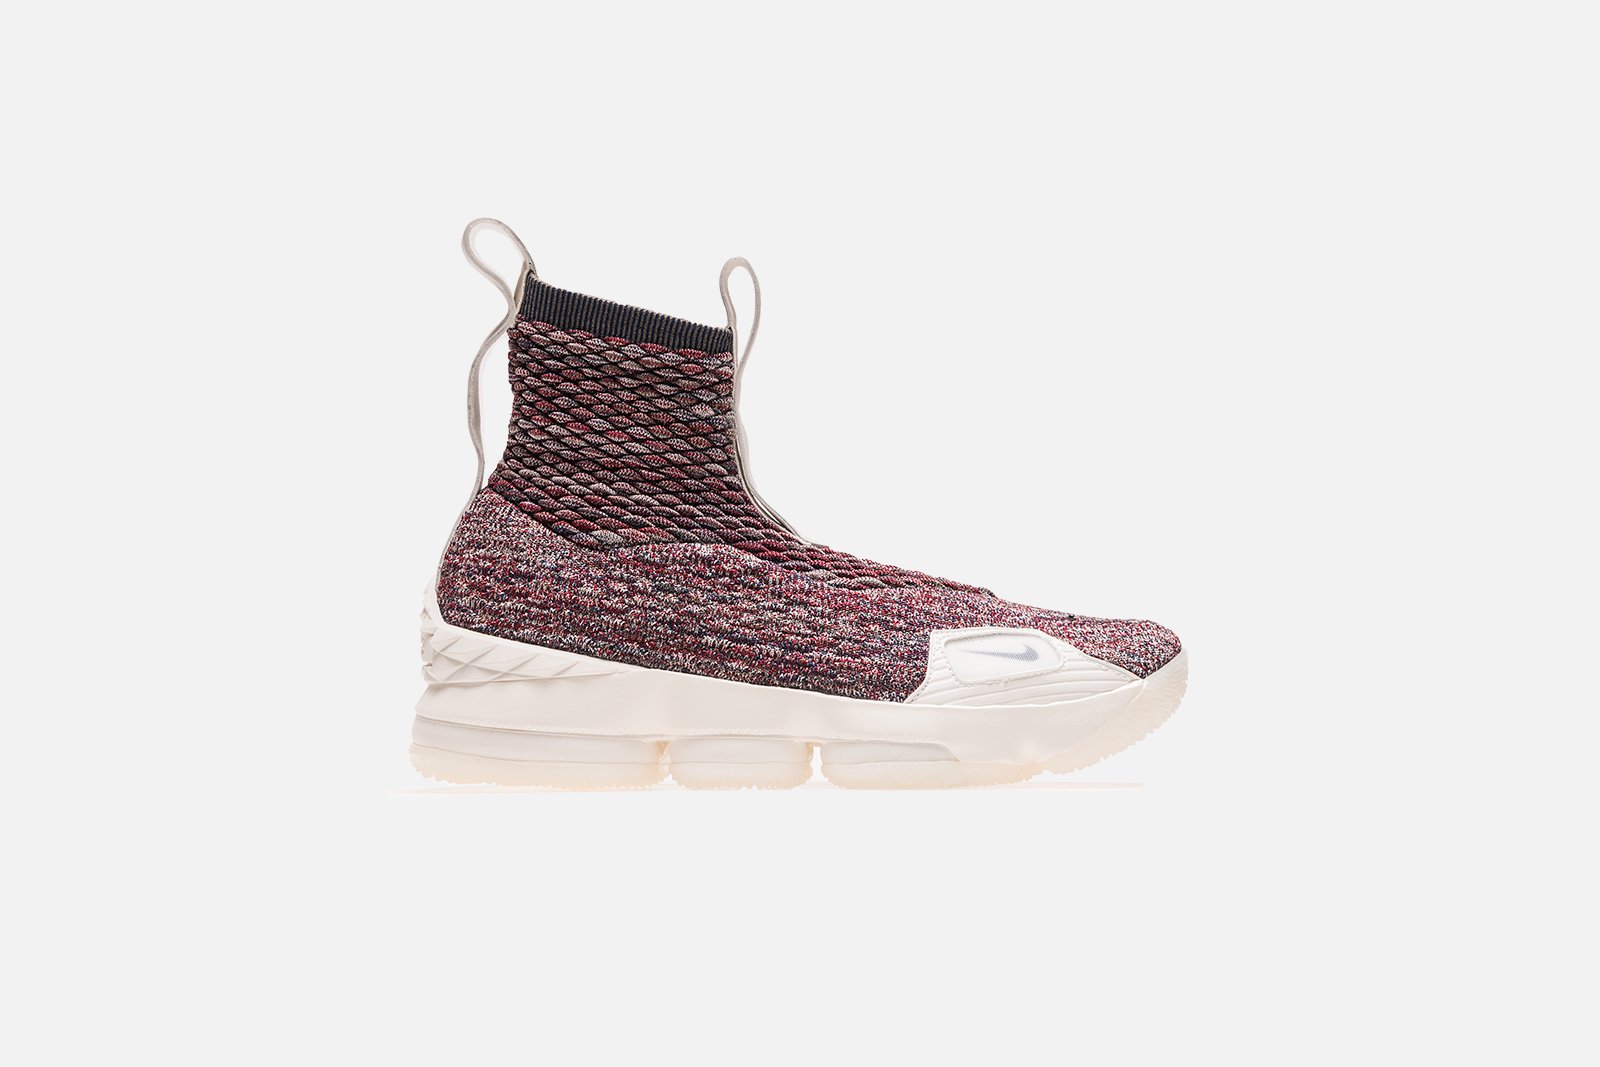 05-nike-lebron-15-lifestyle-x-kith-stained-glass-ao1068-900